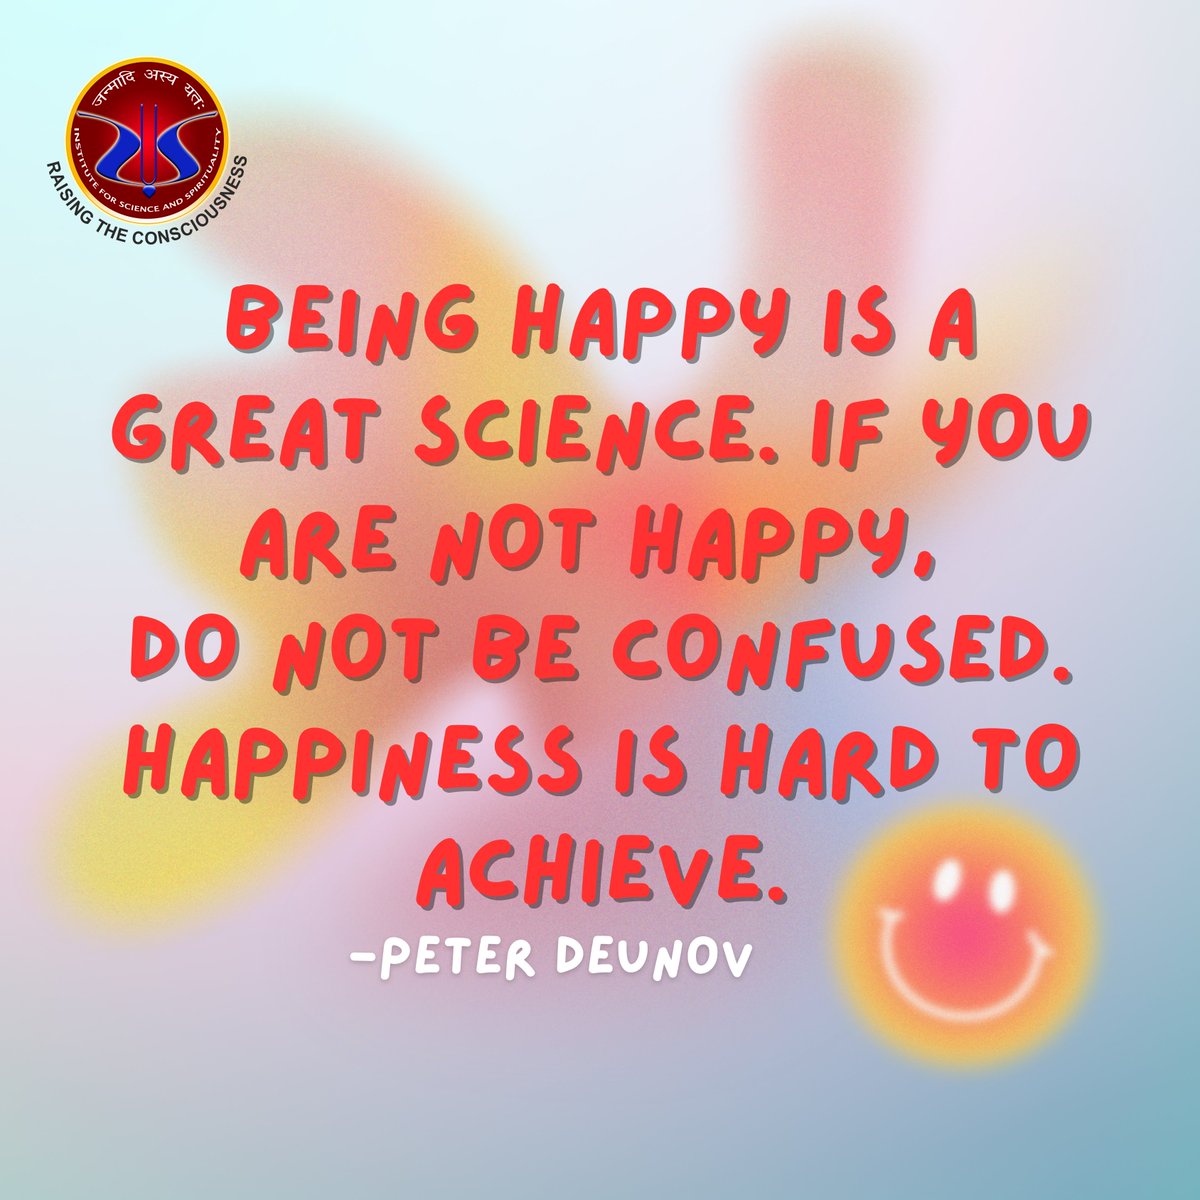 HAPPINESS IS A SCIENCE 

#Science #Consciousness #Scienceofconsciousness #discoveryourself #scientificcommunity #selfconsciousness #ISS #instituteforscienceandspirituality #seslfdiscovery #knowledge #mindbodysoul #roadblockstohappiness #happylife #happiness #peterdeunov